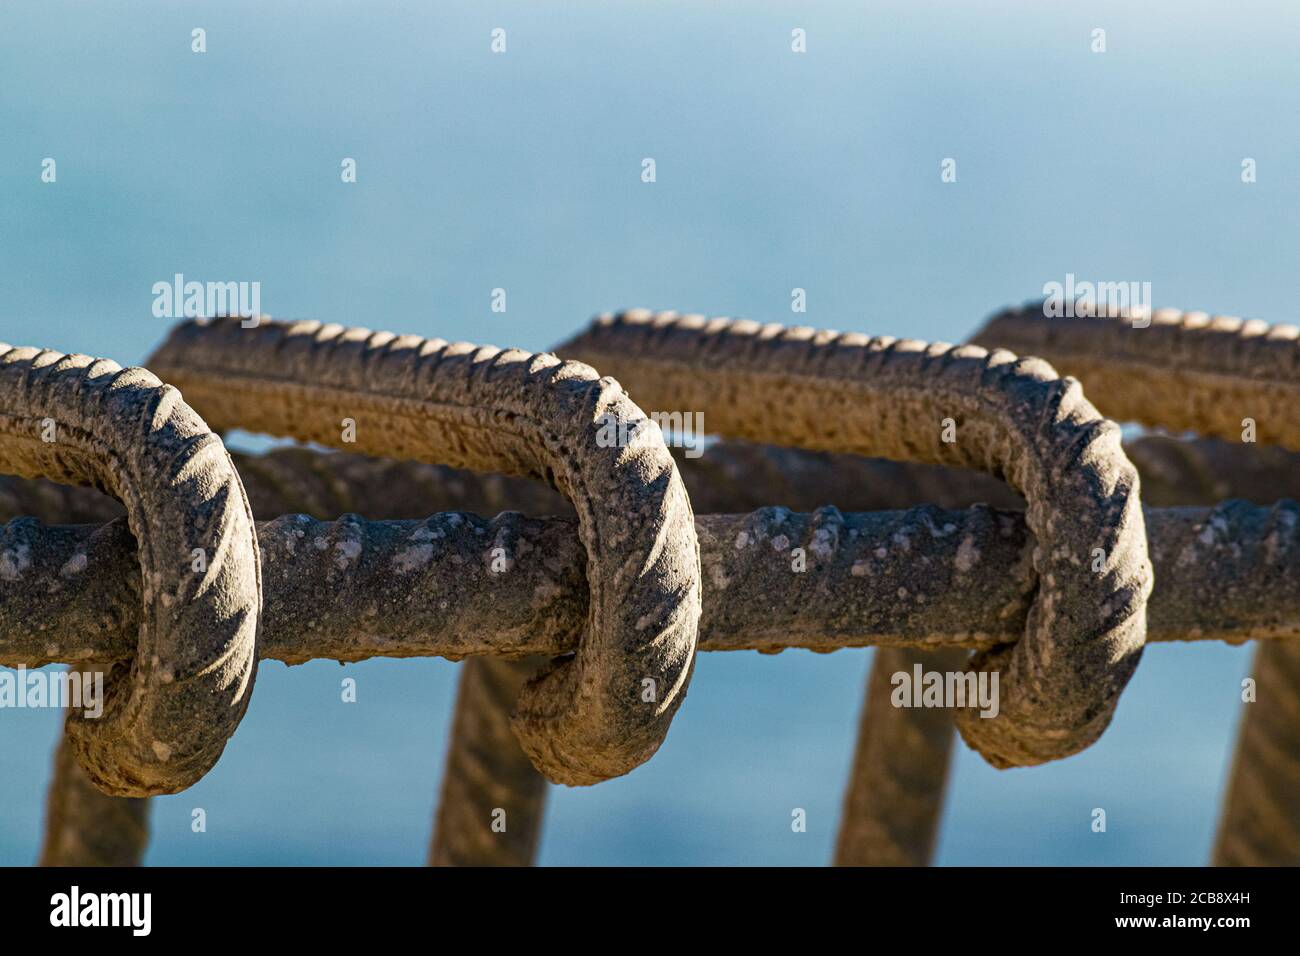 Close-up on iron bar reinforcement on a construction site. Stock Photo